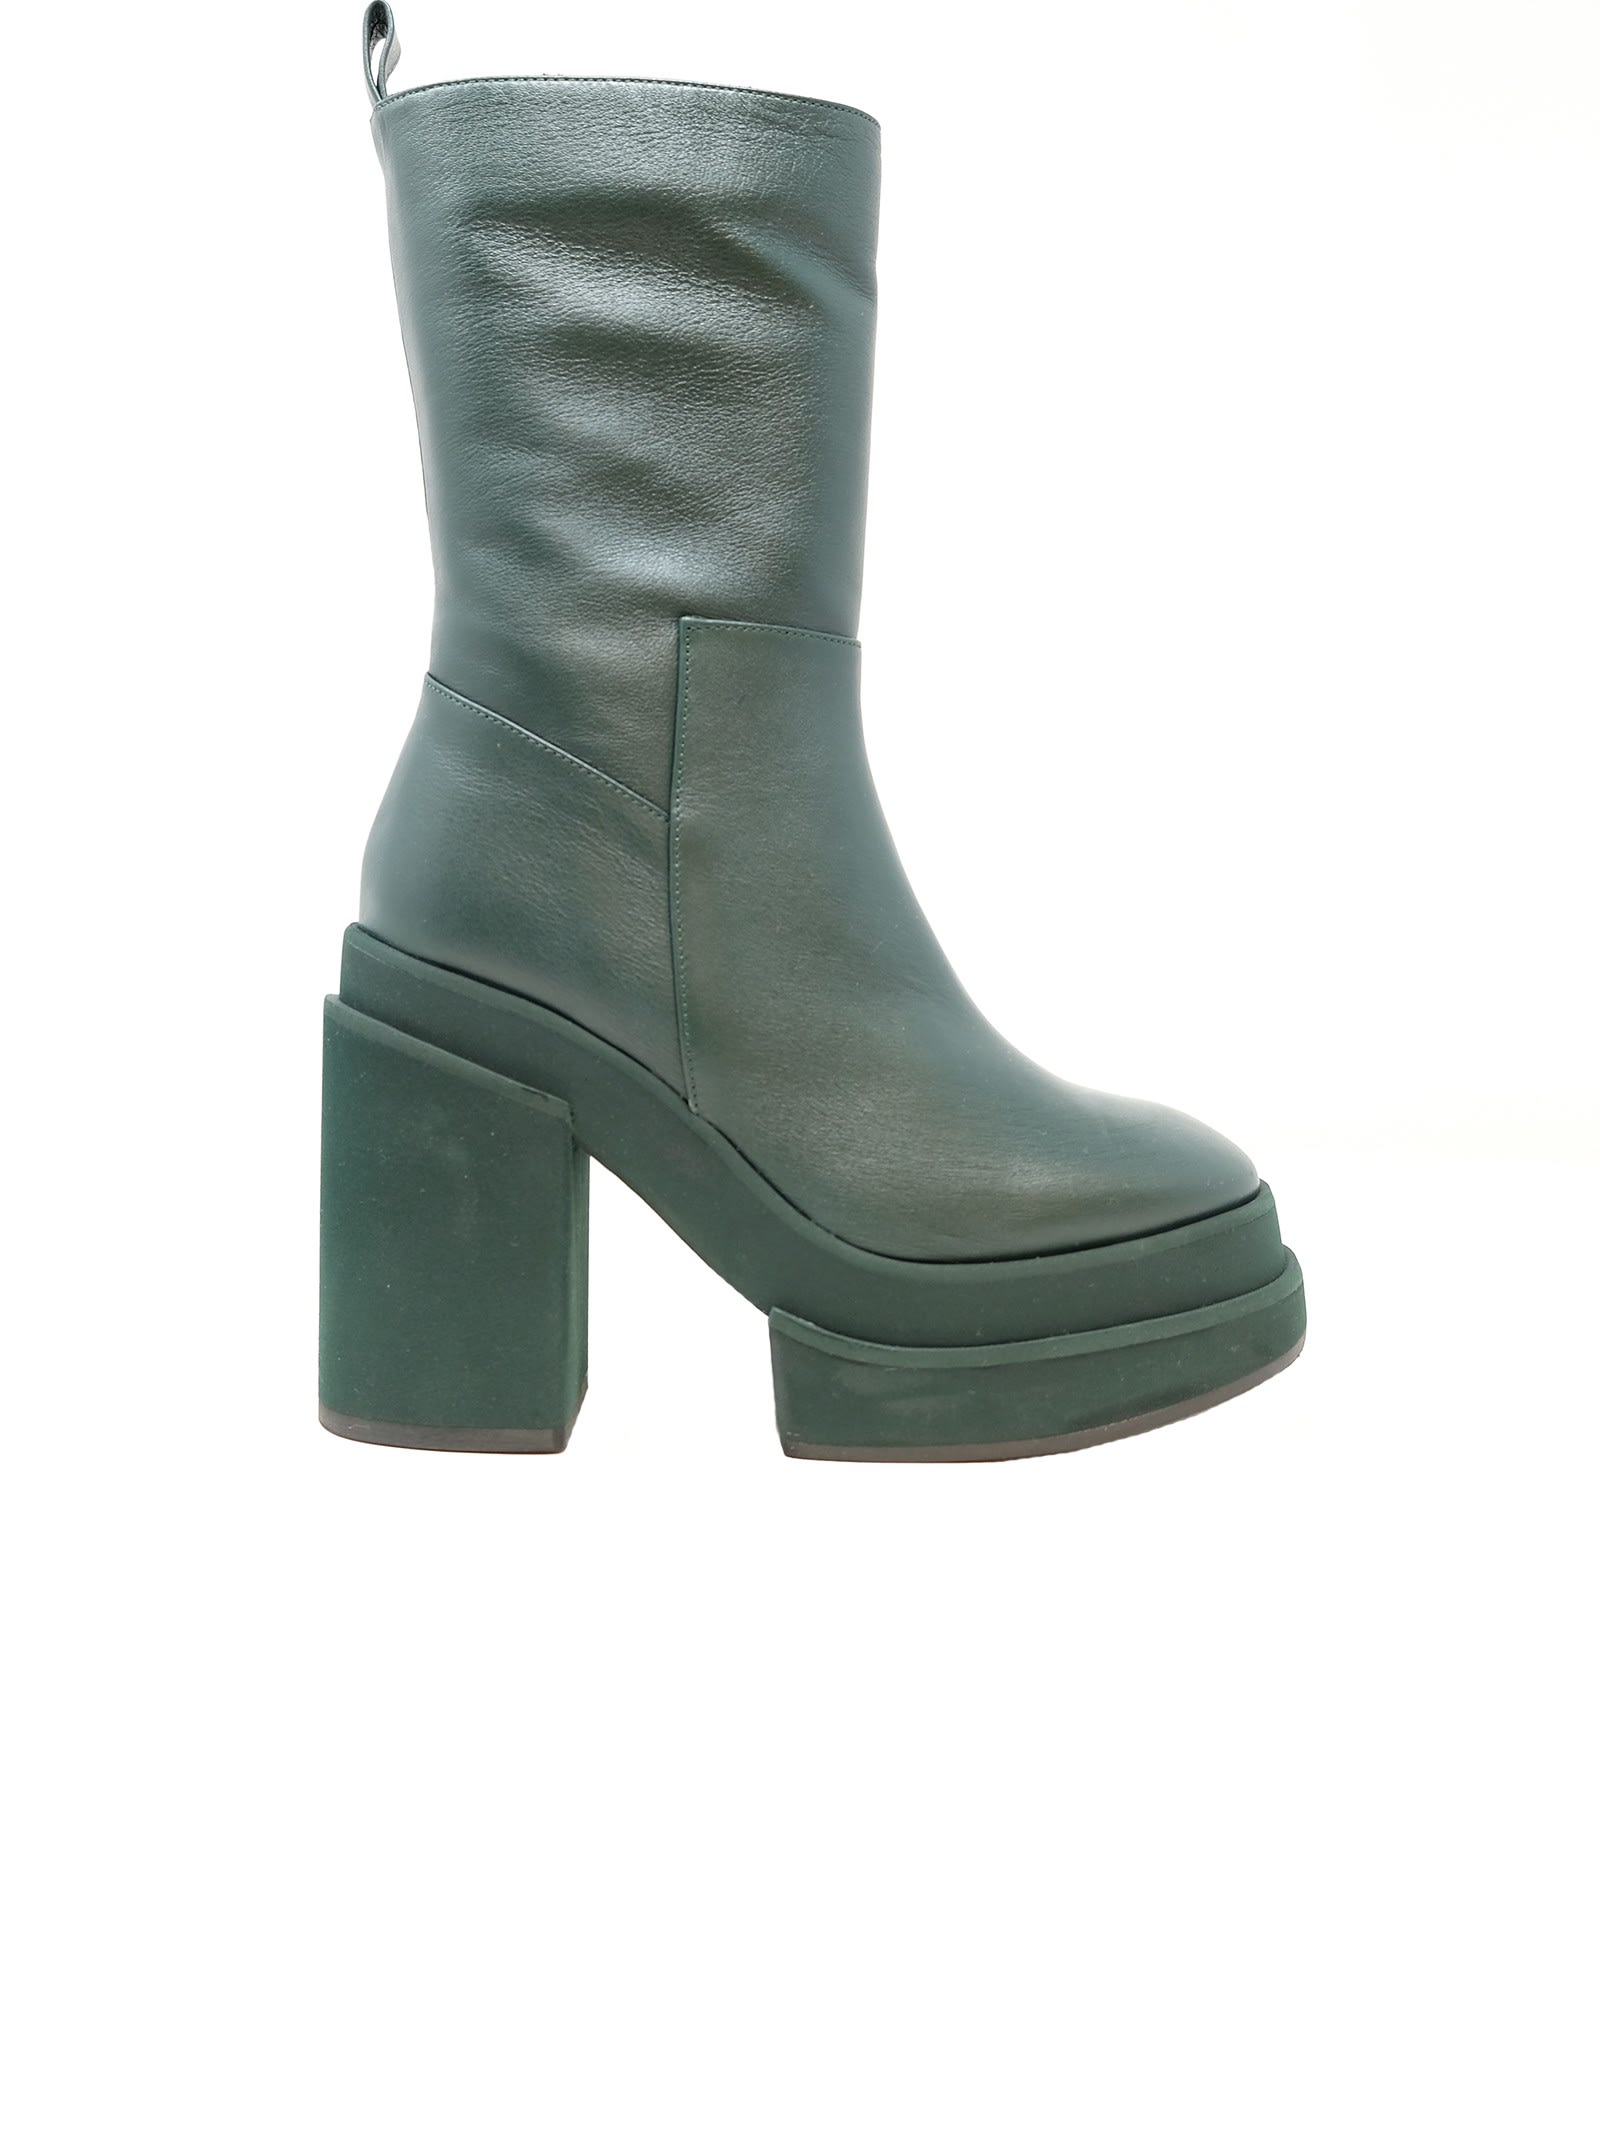 Paloma Barceló Block-heel 12cm Boots In Green